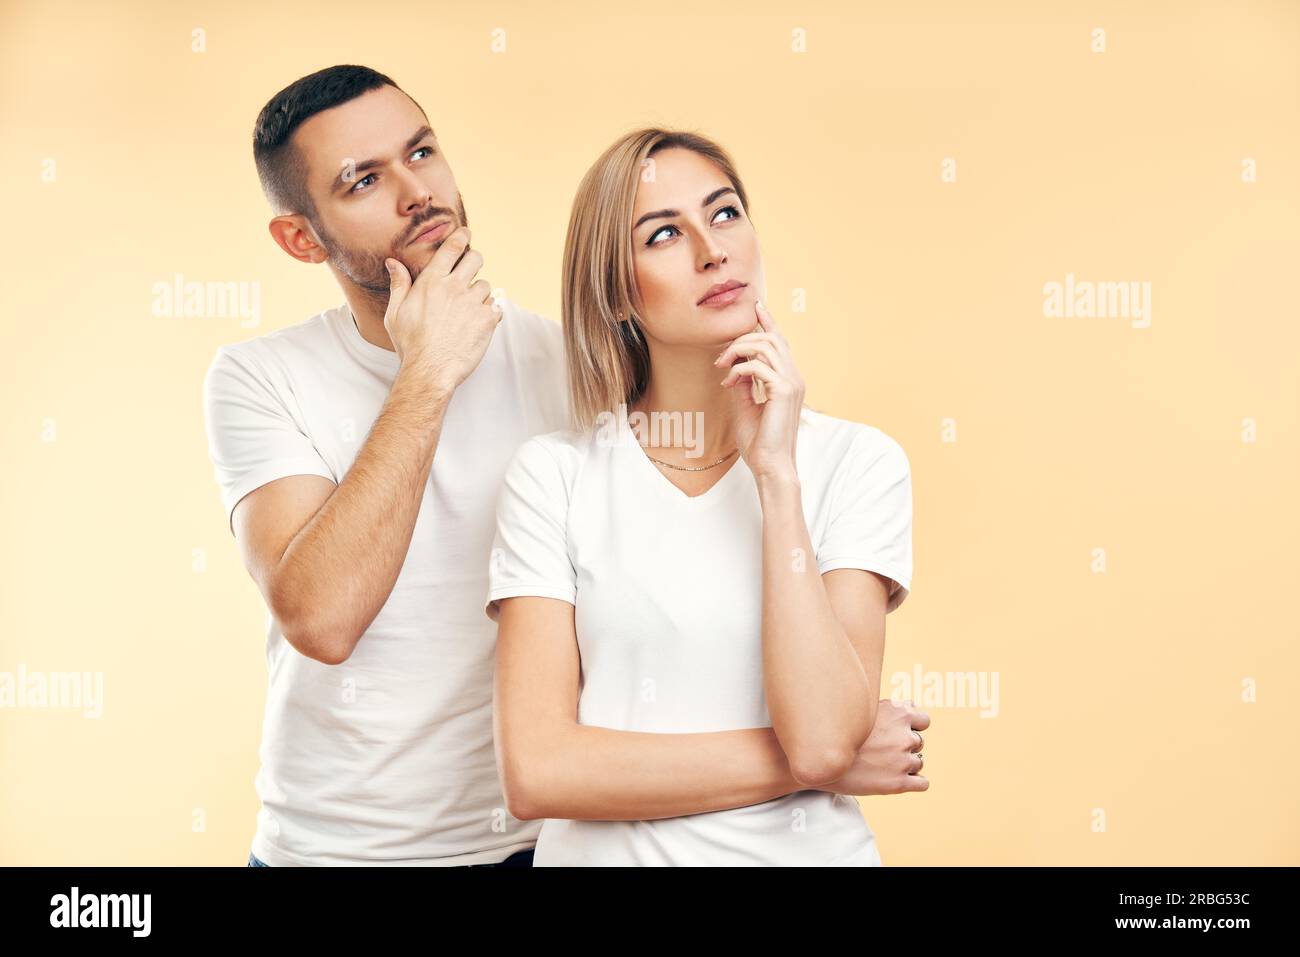 Young thoughtful man and woman looking sideways isolated on beige background. Doubt, interest concept Stock Photo